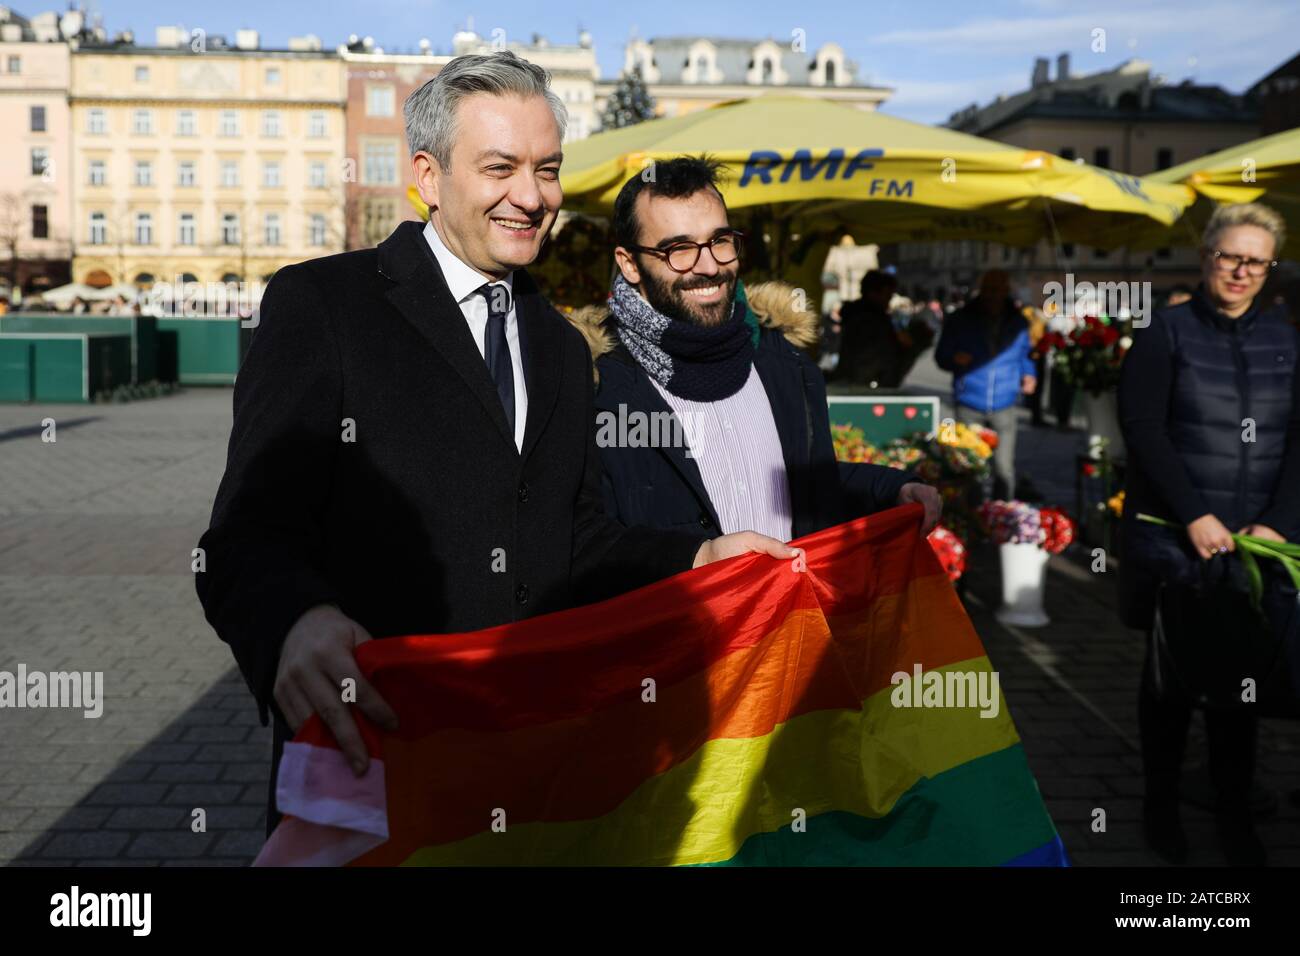 Robert Biedron poses for a photo with a Spanish Erasmus student, a member of the LGBT community after the campaign.Robert Biedron, member of the European parliament and an openly homosexual moderate left-wing presidential candidate started his campaign before the presidential elections in Poland. Although Poland is associated with traditionalism, he is gaining support among the young people with liberal and/or left-wing views in opposition to the right-wing conservatism of the current president. He is the first member of the Polish LGBT community with a chance to take such a high position in t Stock Photo